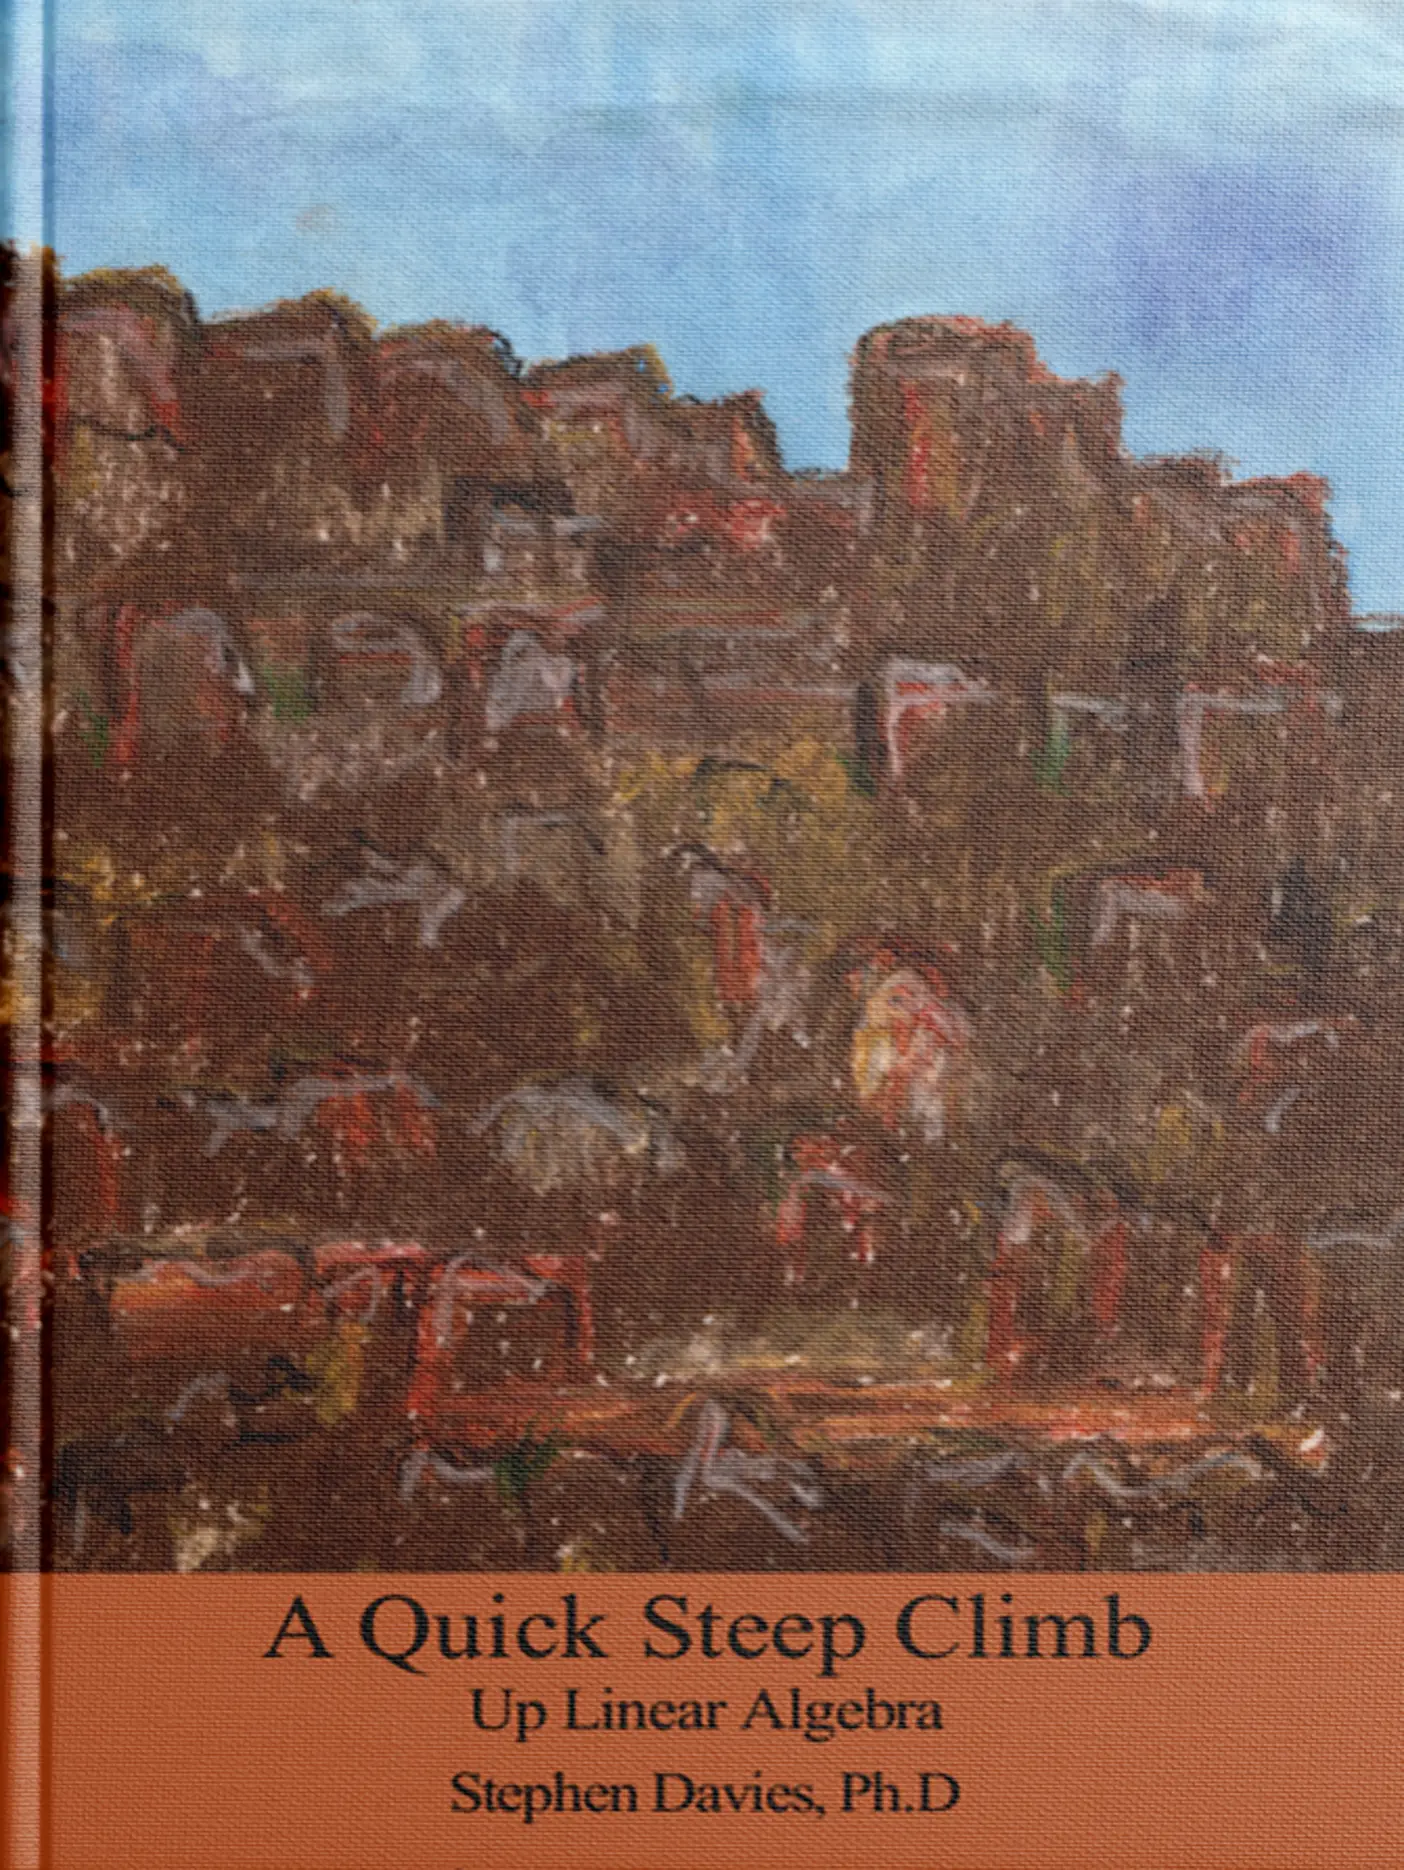 image of book cover, title is A Quick Steep Climb Up Linear Algebra. Author is Stephen Davies, Ph.D. Cover features brown cascading rock face. In painted style.